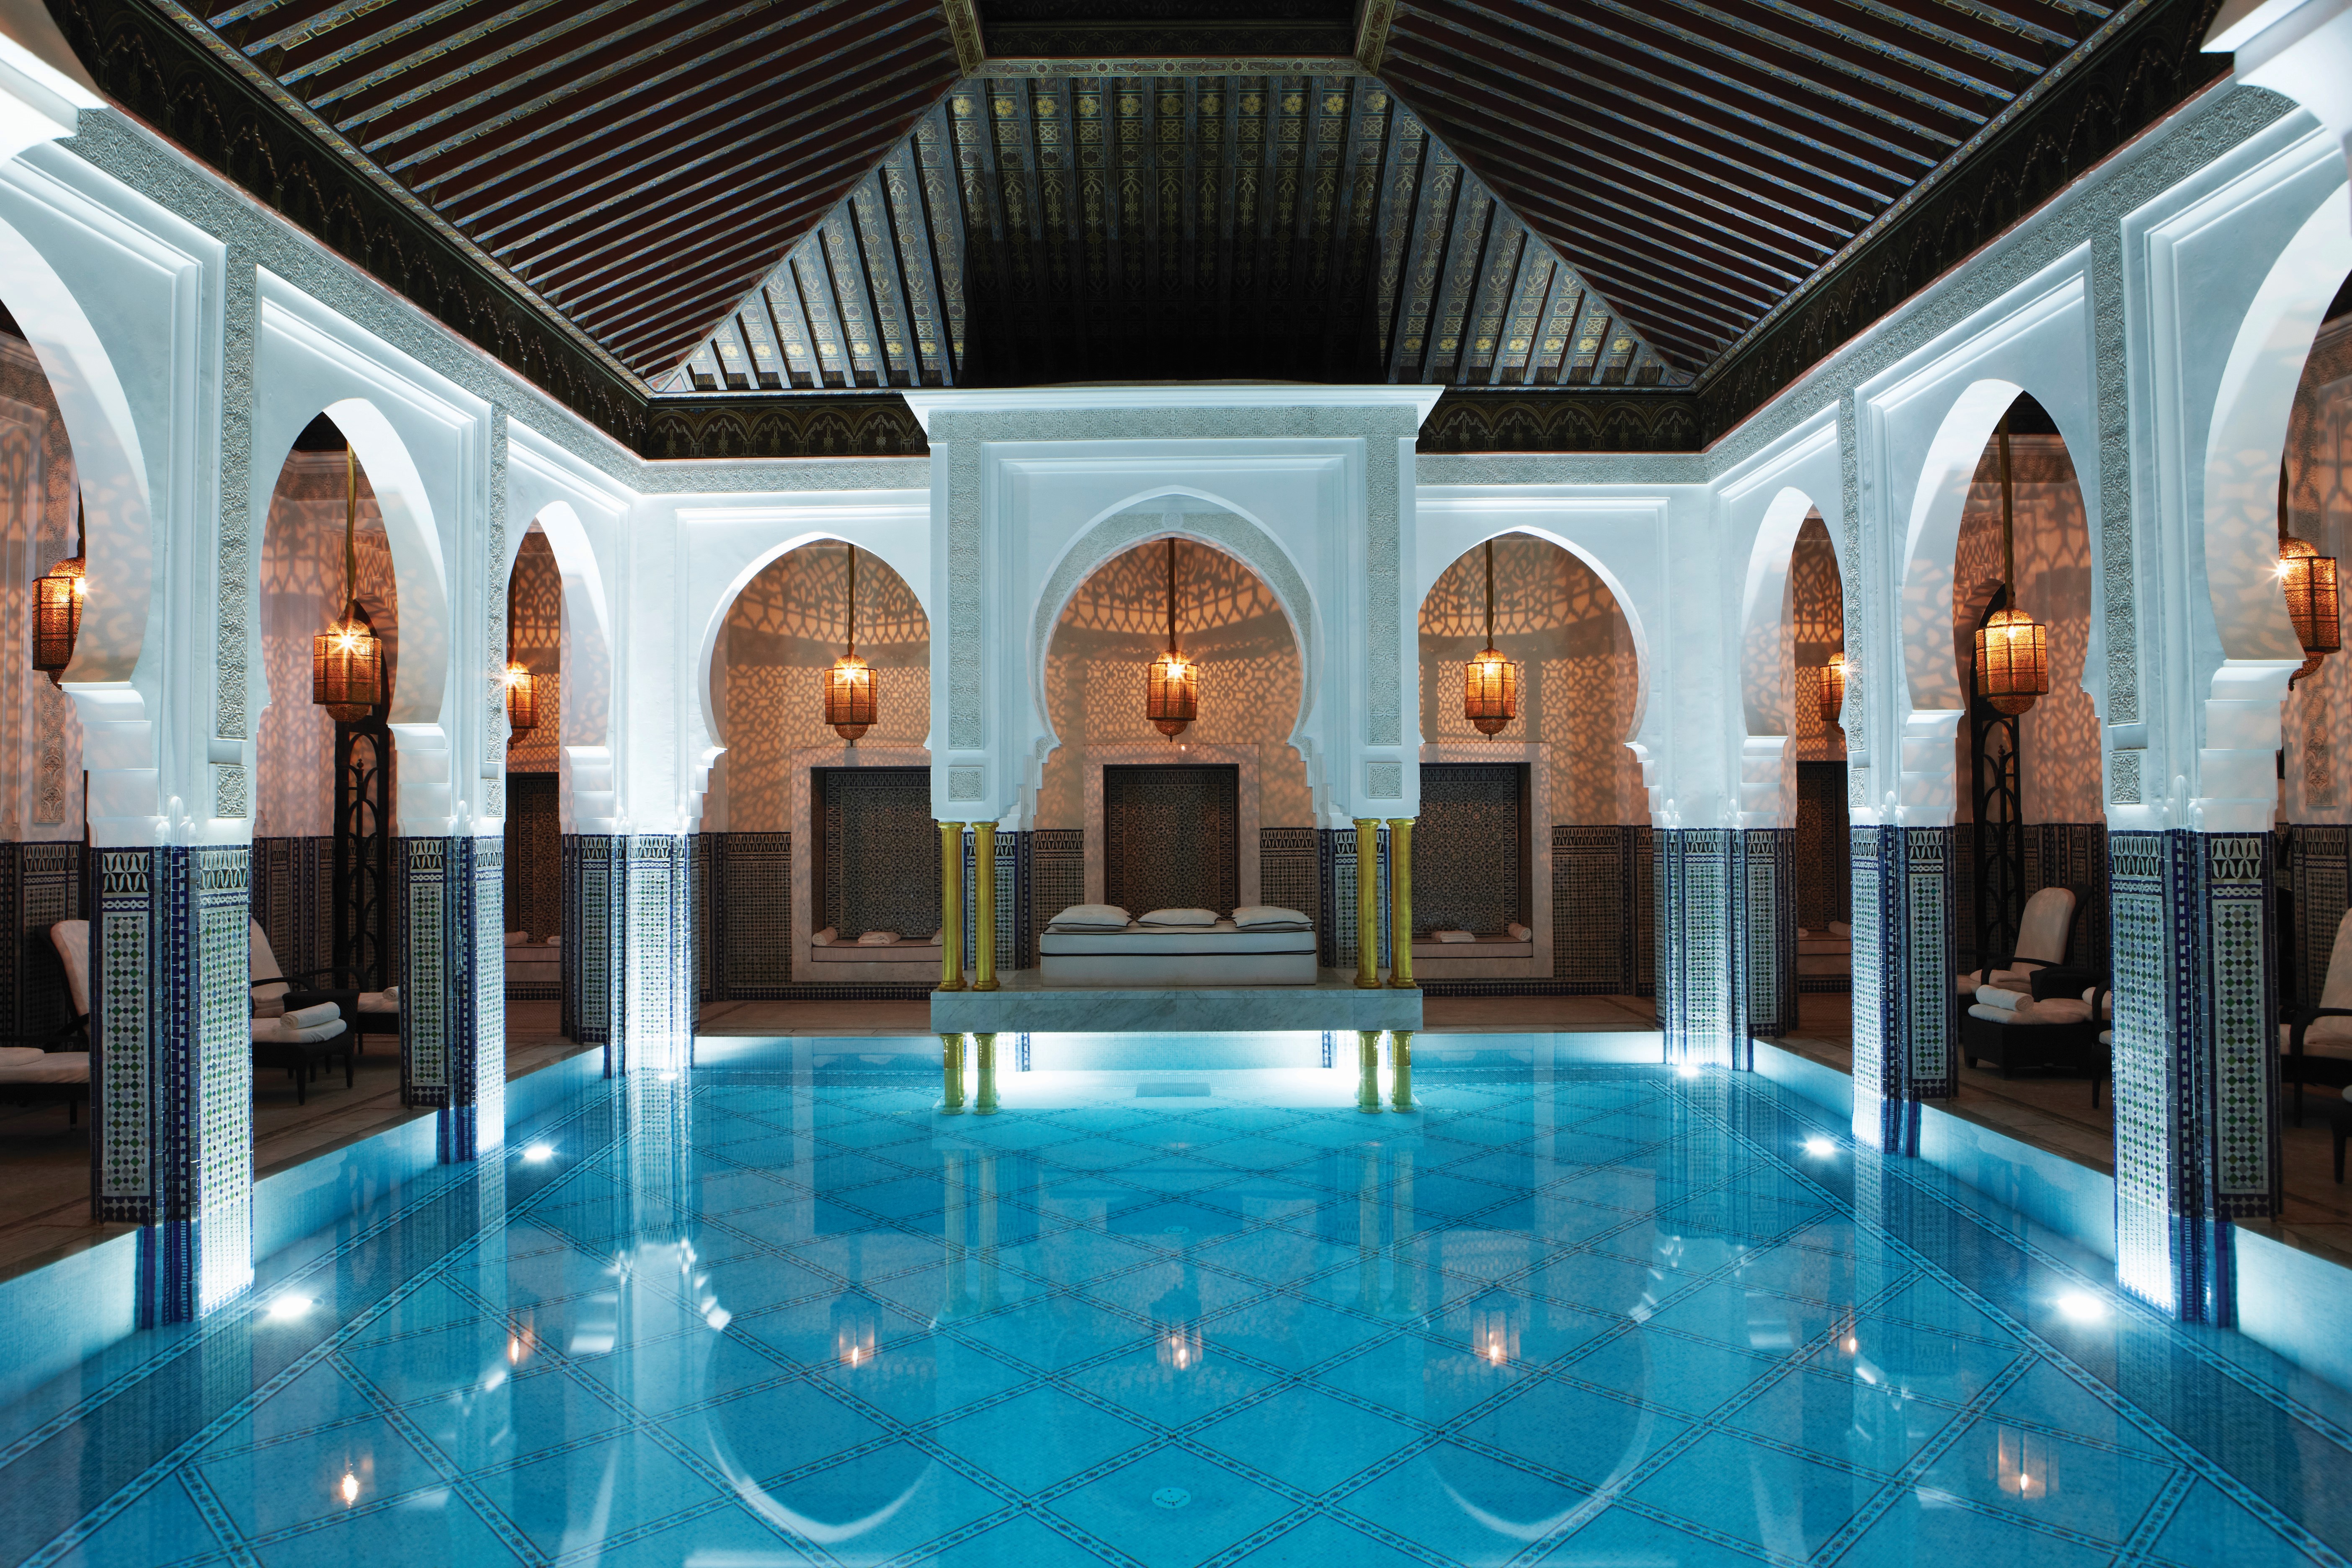 This Fabled Moroccan Hotel Got A Multimillion-Dollar Makeover For Its 100th Anniversary